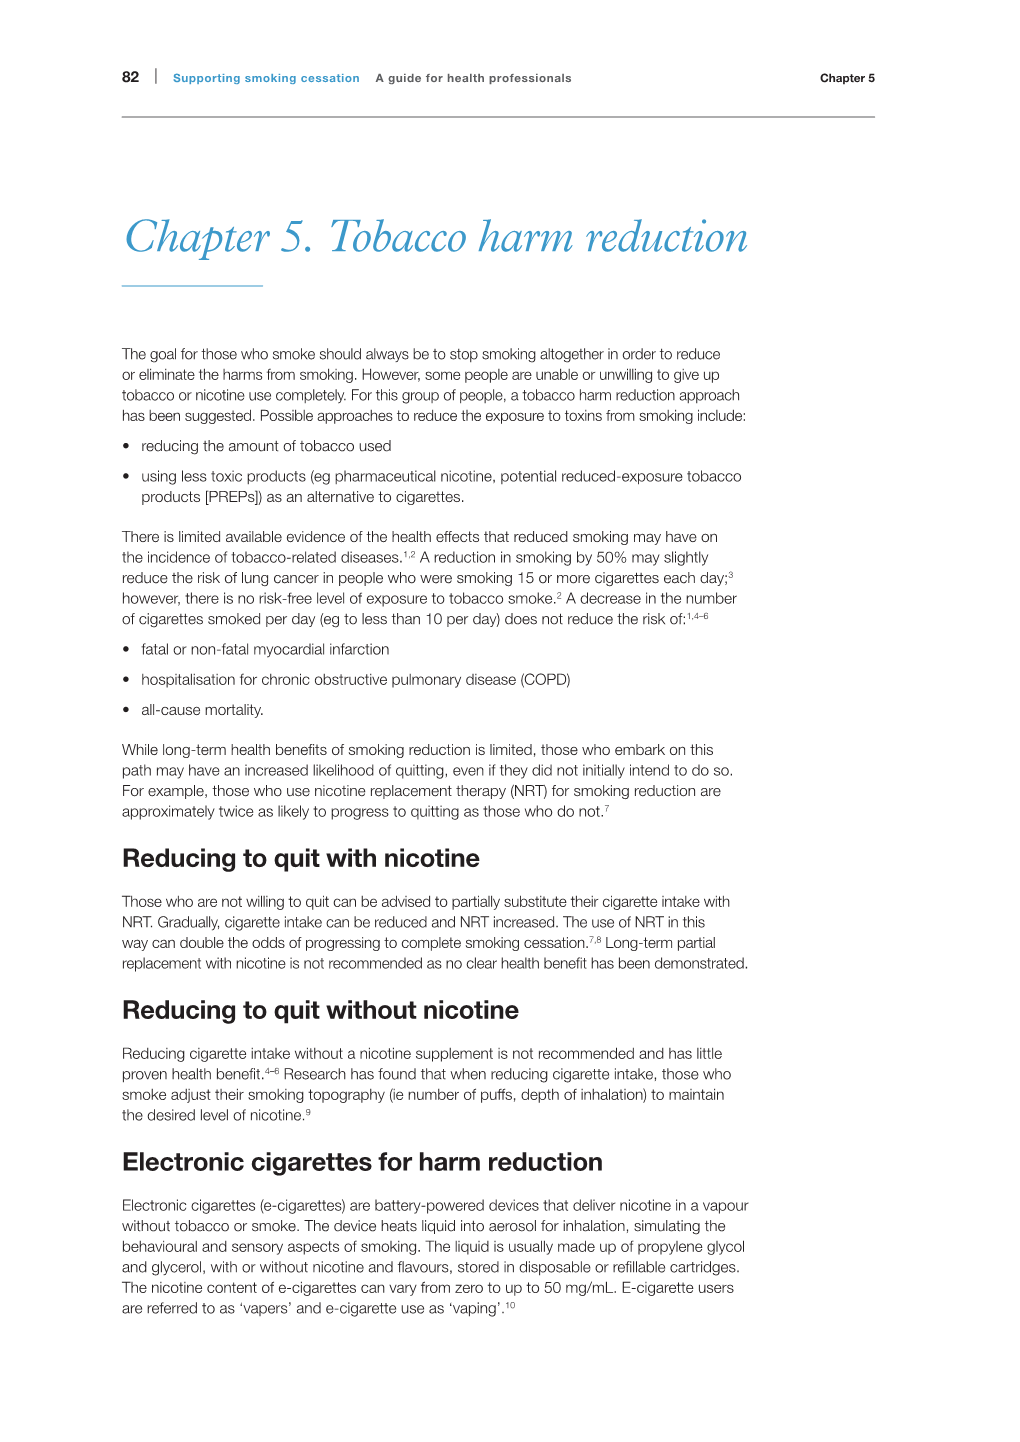 Chapter 5. Tobacco Harm Reduction